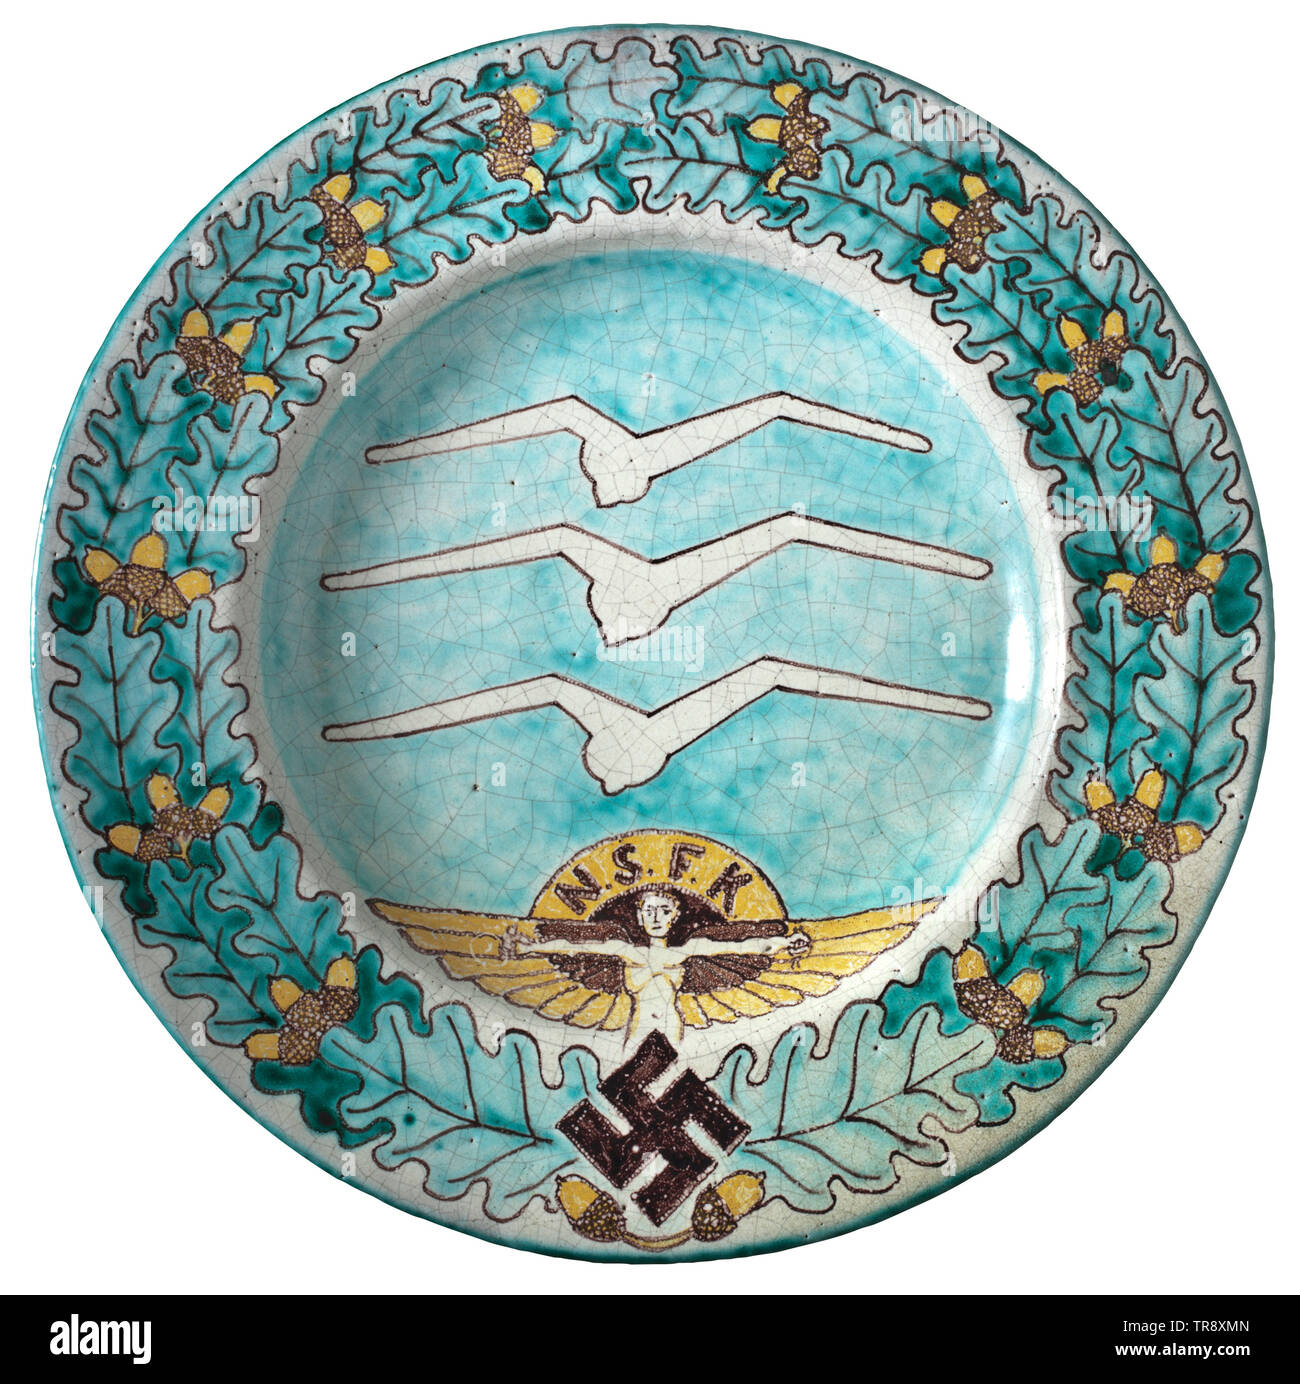 A large hand-painted wall plate Glazed stoneware. Coloured underglaze painting with NSFK (National Socialist Flyers Corps) symbols within an oak leaf wreath. Underglaze inscription 'Stüdemann Thurnau' on the reverse side. Glaze with craquelure. Diameter 38.5 cm. Rare. historic, historical, organisation, organization, organizations, organisations, 20th century, Additional-Rights-Clearance-Info-Not-Available Stock Photo